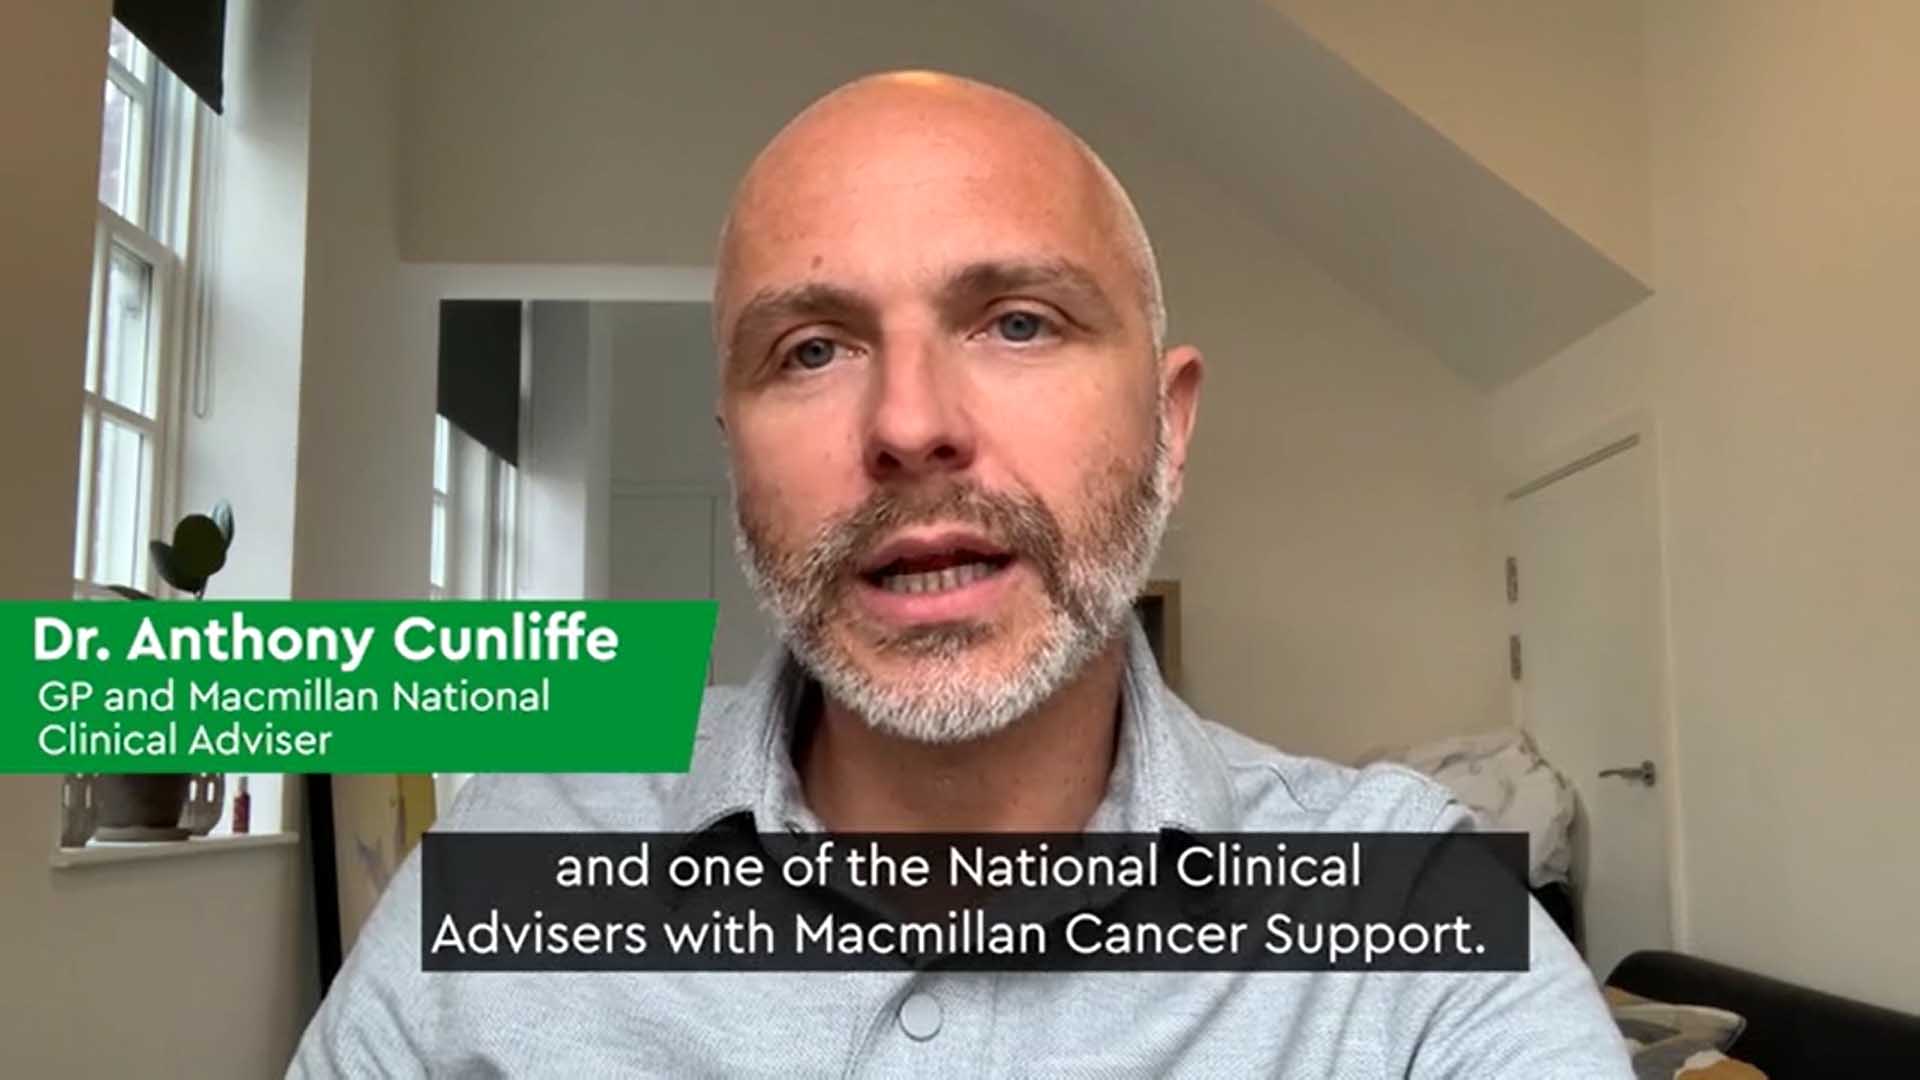 Watch the video to hear Anthony Cunliffe, GP and Macmillan Clinical Adviser, talking about the new referral process and how the support line can benefit your patients.